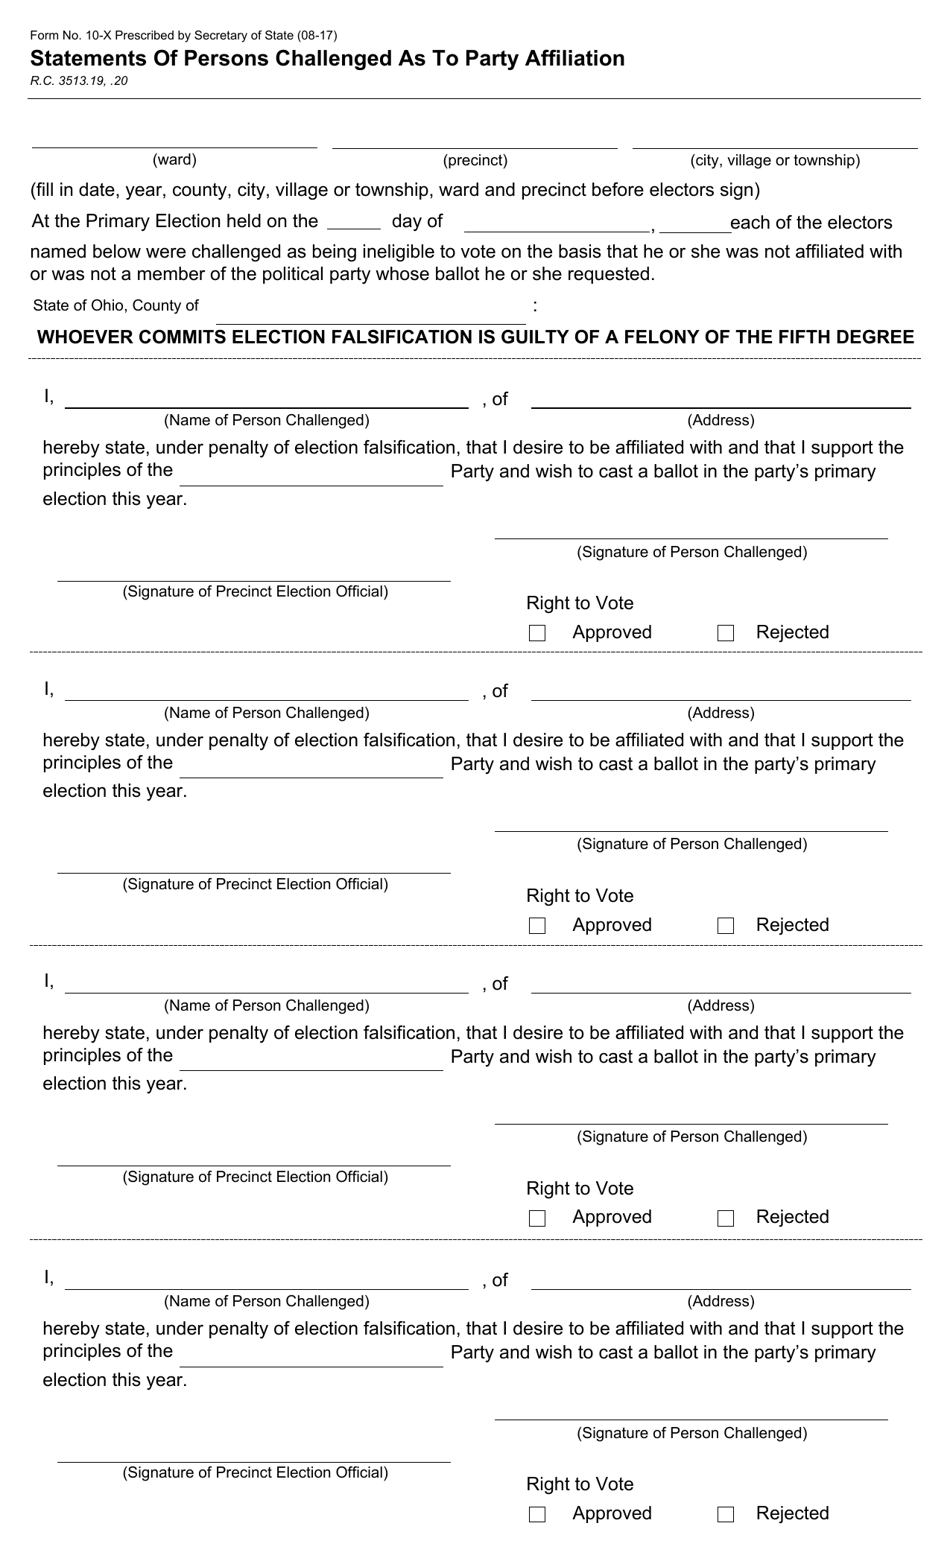 Form 10-X Statements of Persons Challenged as to Party Affiliation - Ohio, Page 1